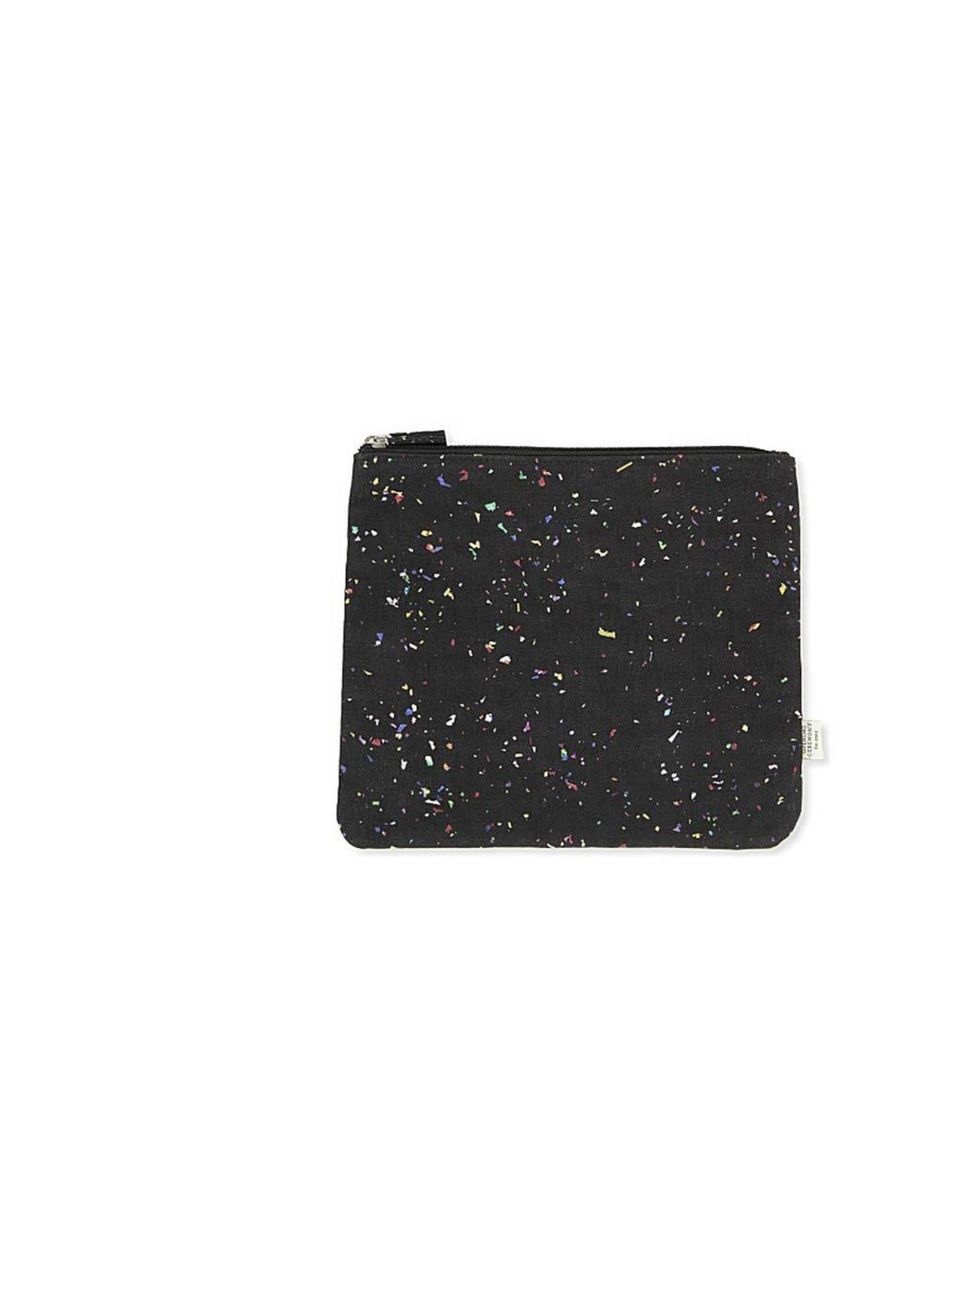 <p>This confetti-print pouch is festive without being OTT - and will still be wearable in the new year!</p><p>Opening Ceremony clutch, £32 at <a href="http://www.selfridges.com/en/Womenswear/Categories/NEW-IN/Accessories/Large-confetti-pouch-bag_236-20005